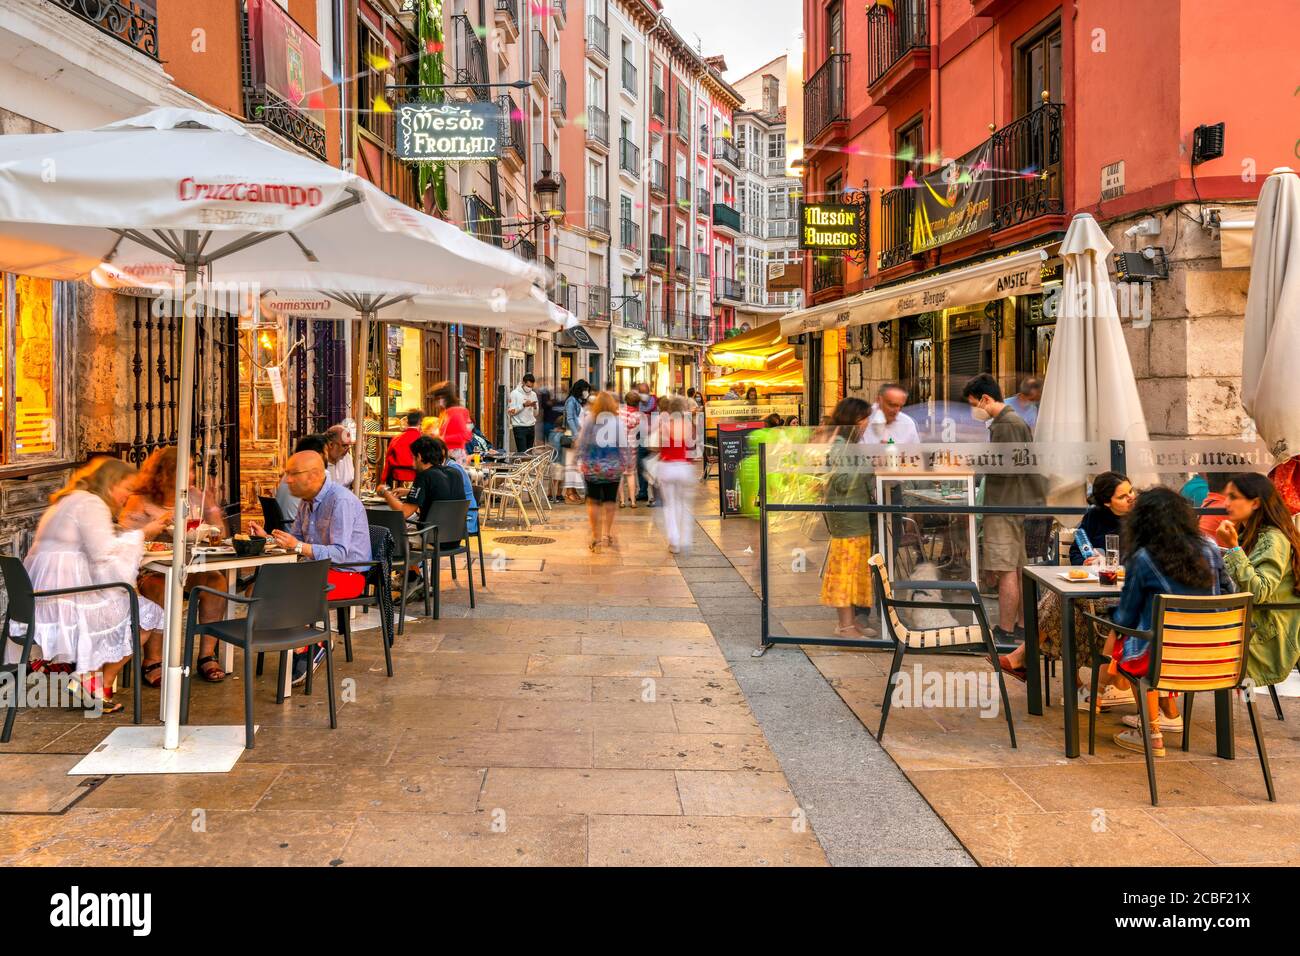 Al fresco dining in a street of the old town, Burgos, Castile and Leon, Spain Stock Photo